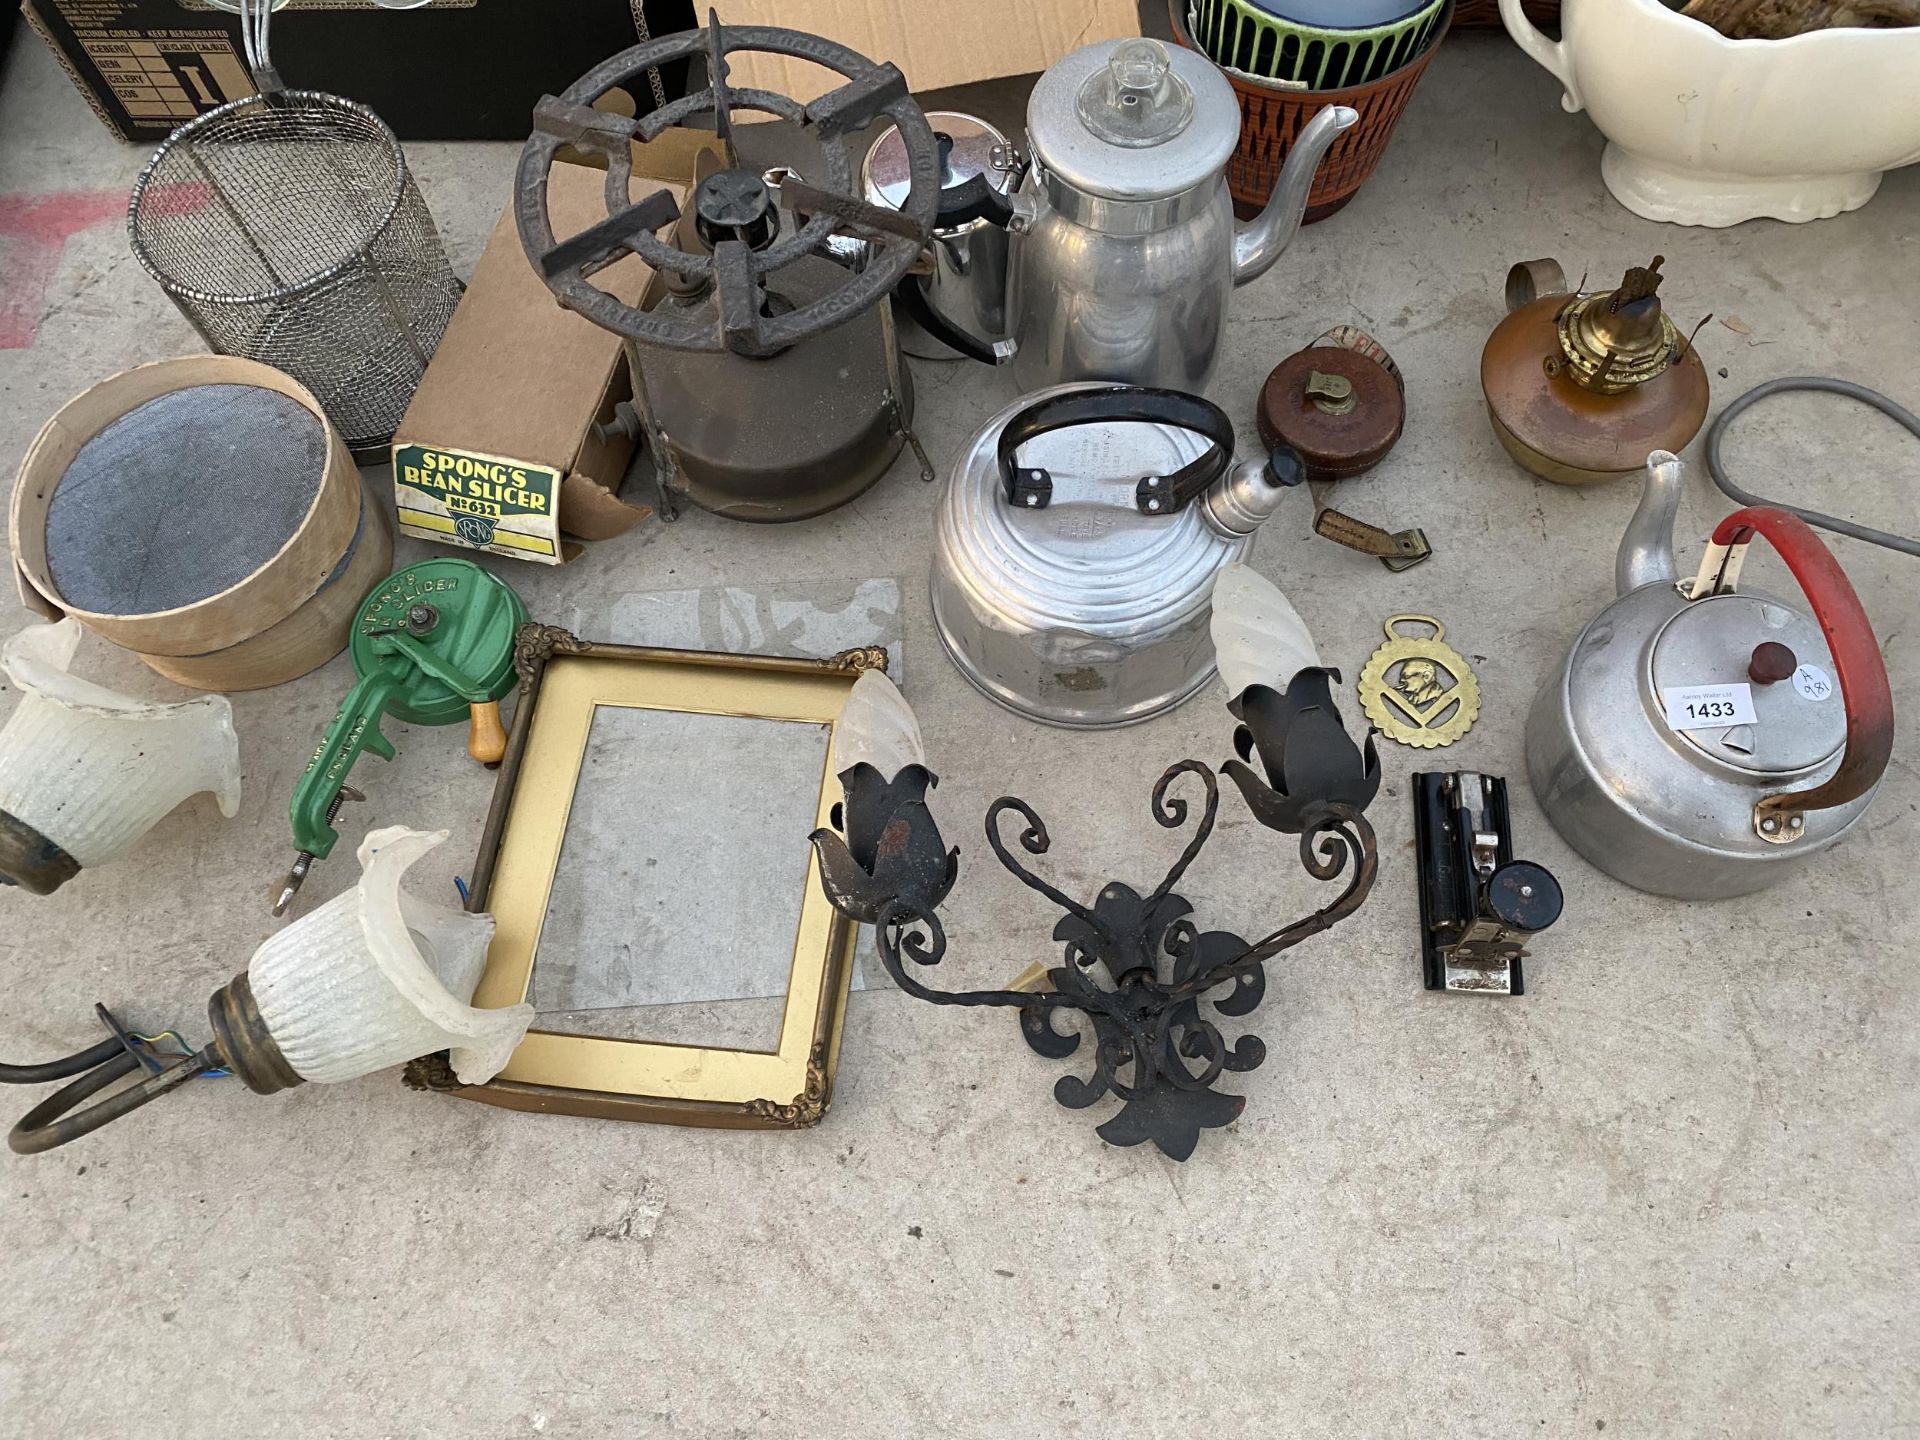 AN ASSORTMENT OF ITEMS TO INCLIUDE A VINTAGE BEAN SLICER, A VINTAGE CAMPING CSTOVE AND A PARAFIN